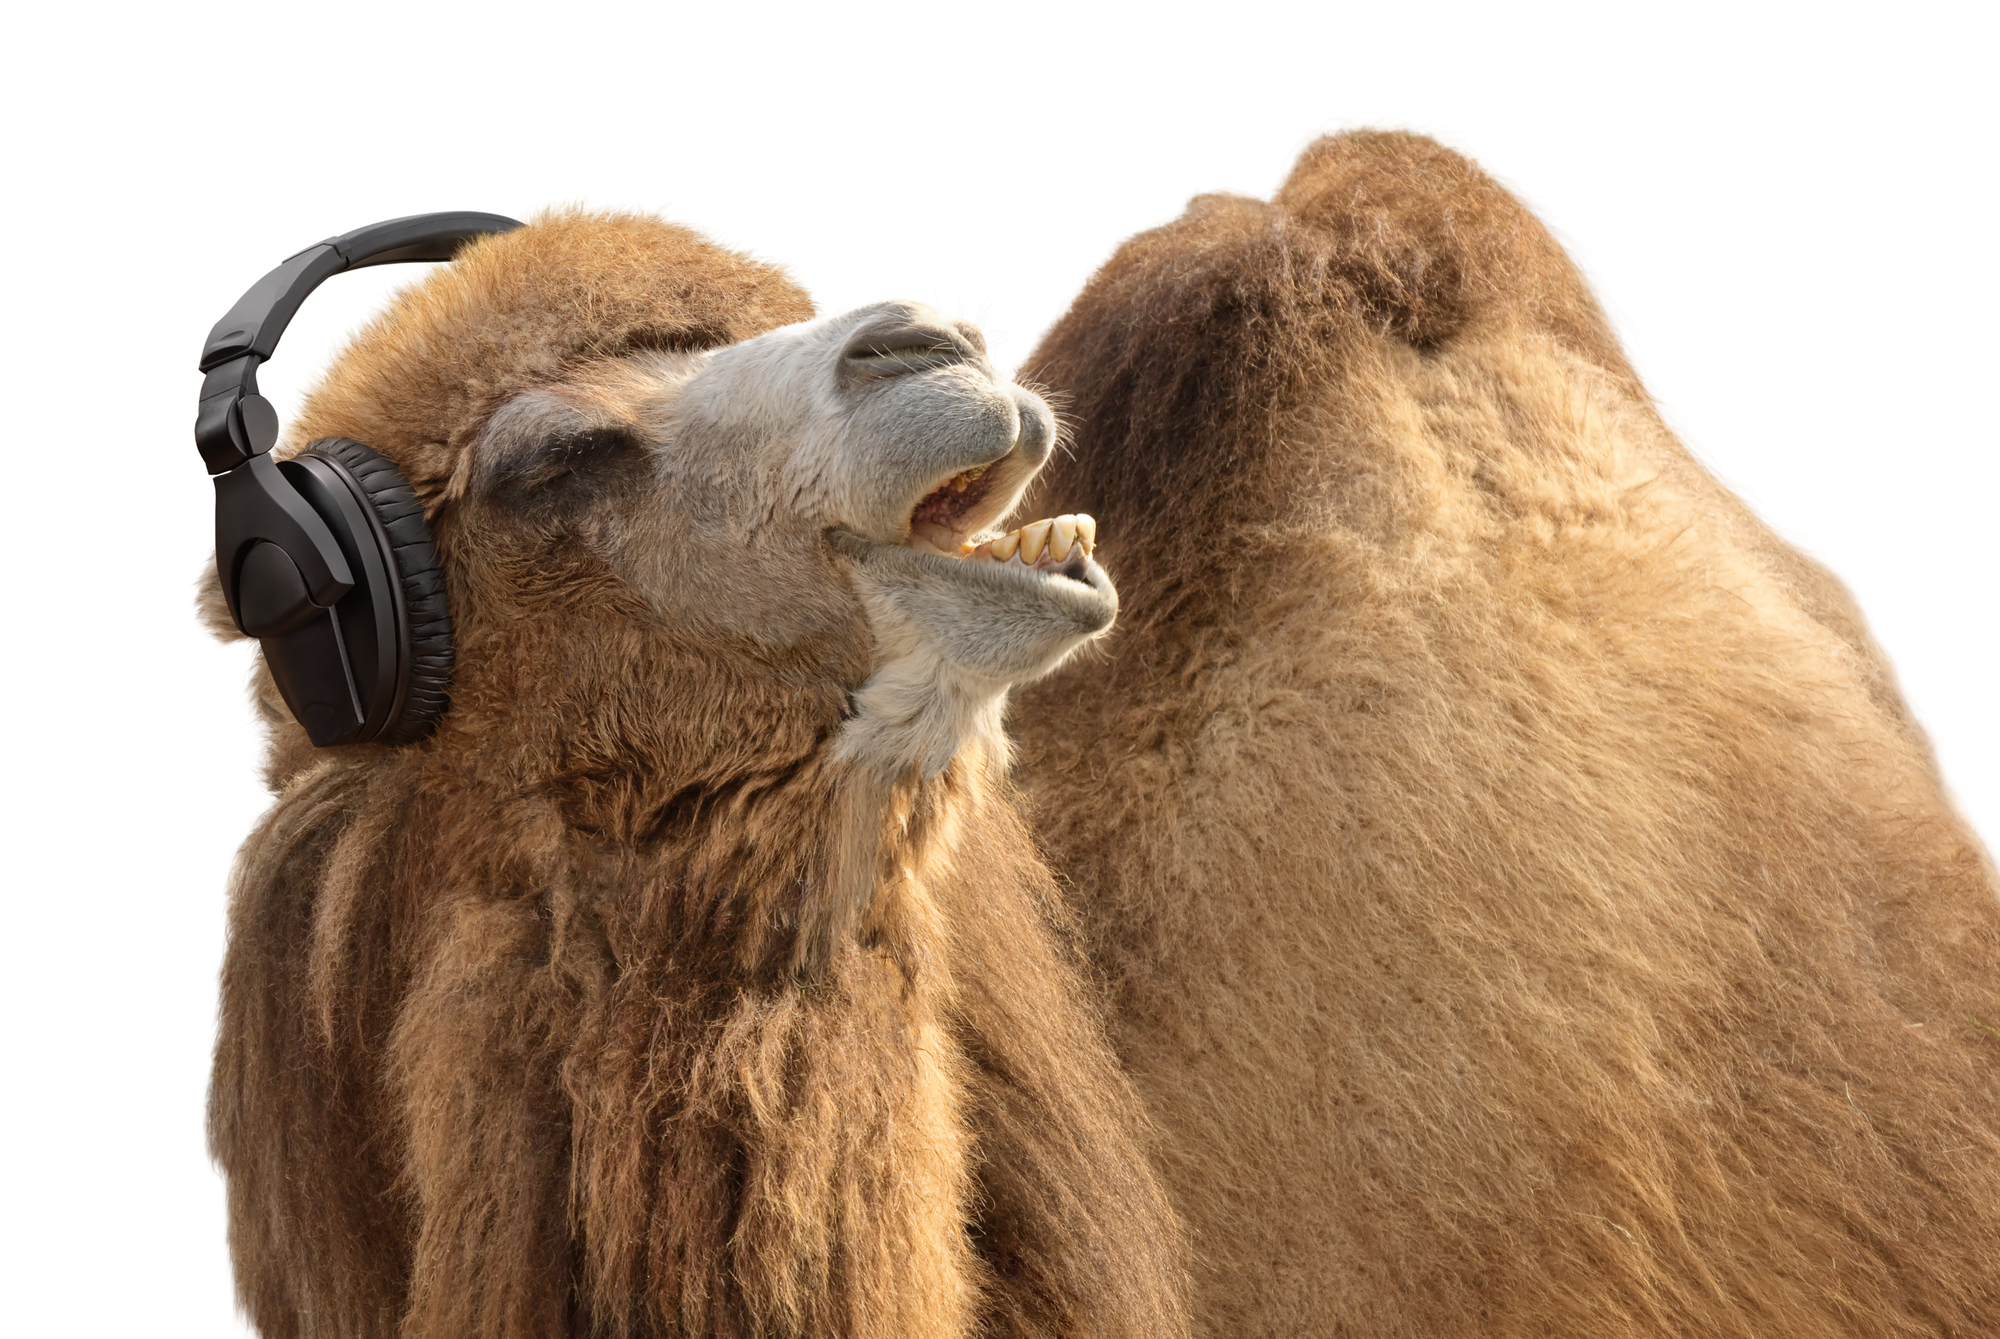 Camel with headphones singing passionately